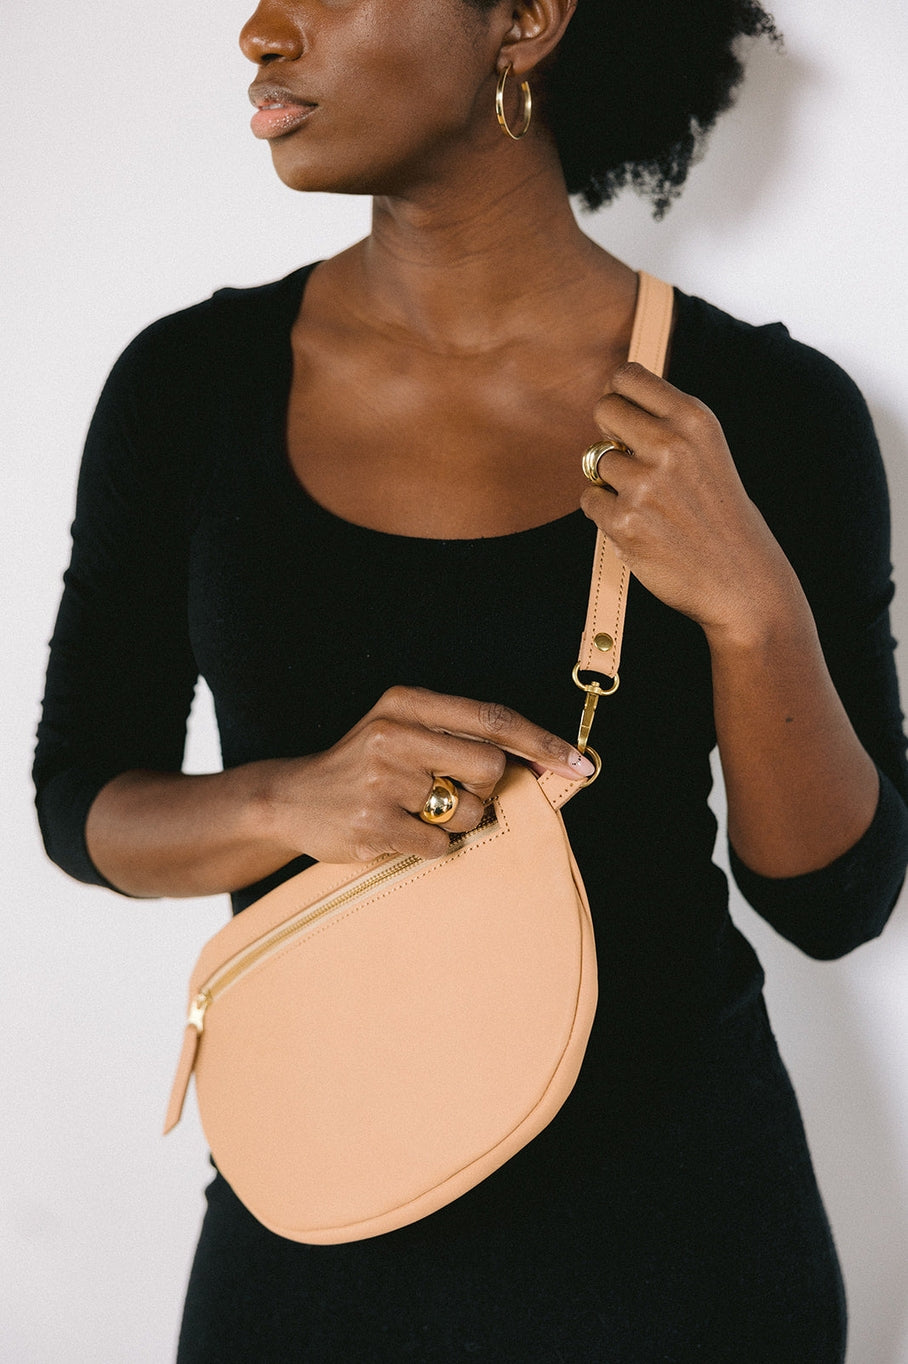 The best-selling Sling Bag is now available in a bigger size. Still sleek, lightweight, and chic, now you'll be able to add that *one* extra thing. Your large wallet, glasses case, or even a small book will fit inside the Big Sling. Fair trade and adjustable leather sling bag/fanny pack.